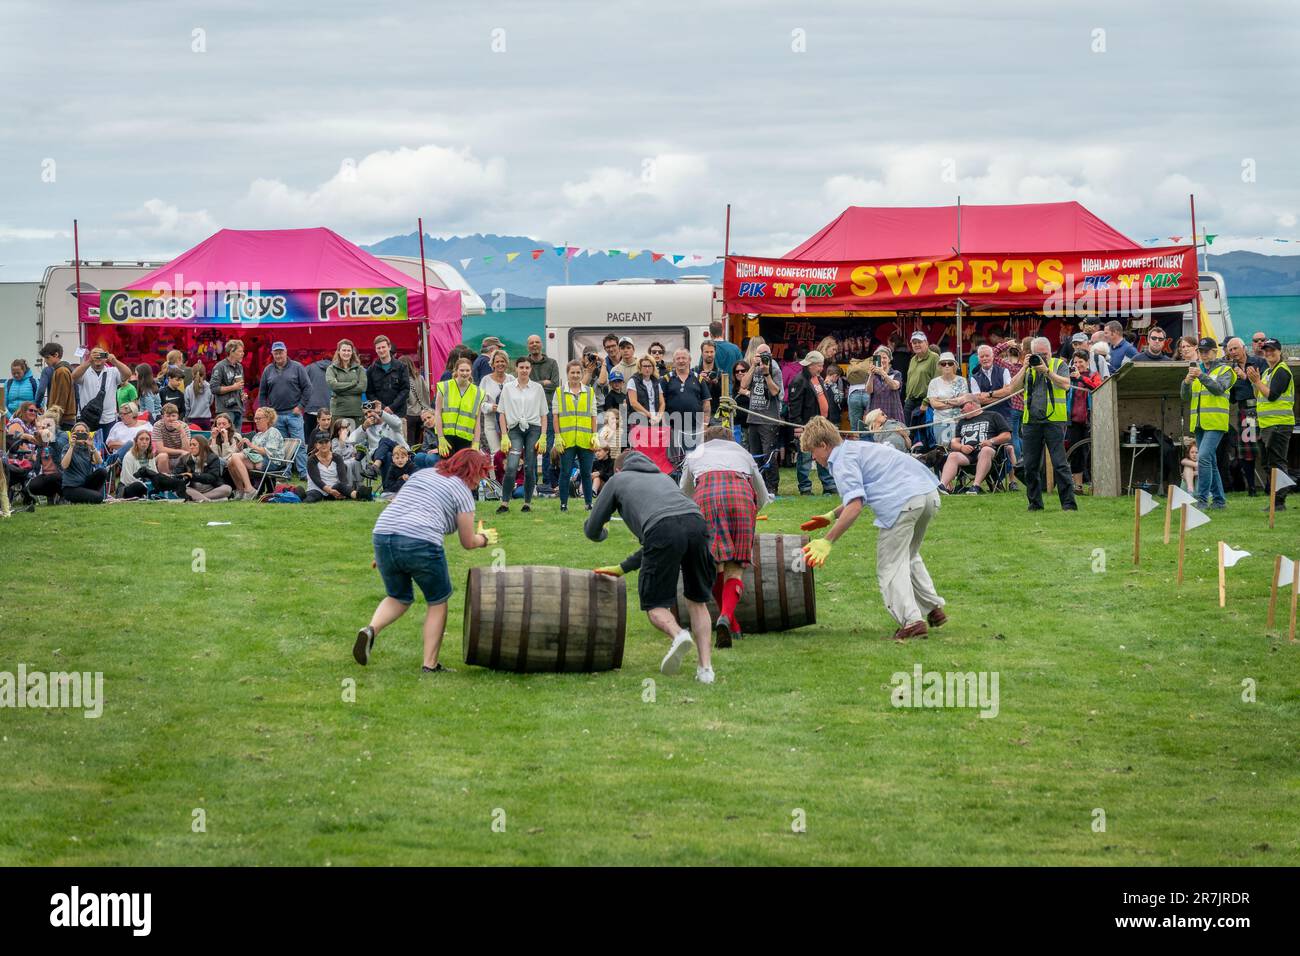 Barrel race event at the Arisaig Highland Games on July 27th, 2022 in Scotland, UK Stock Photo